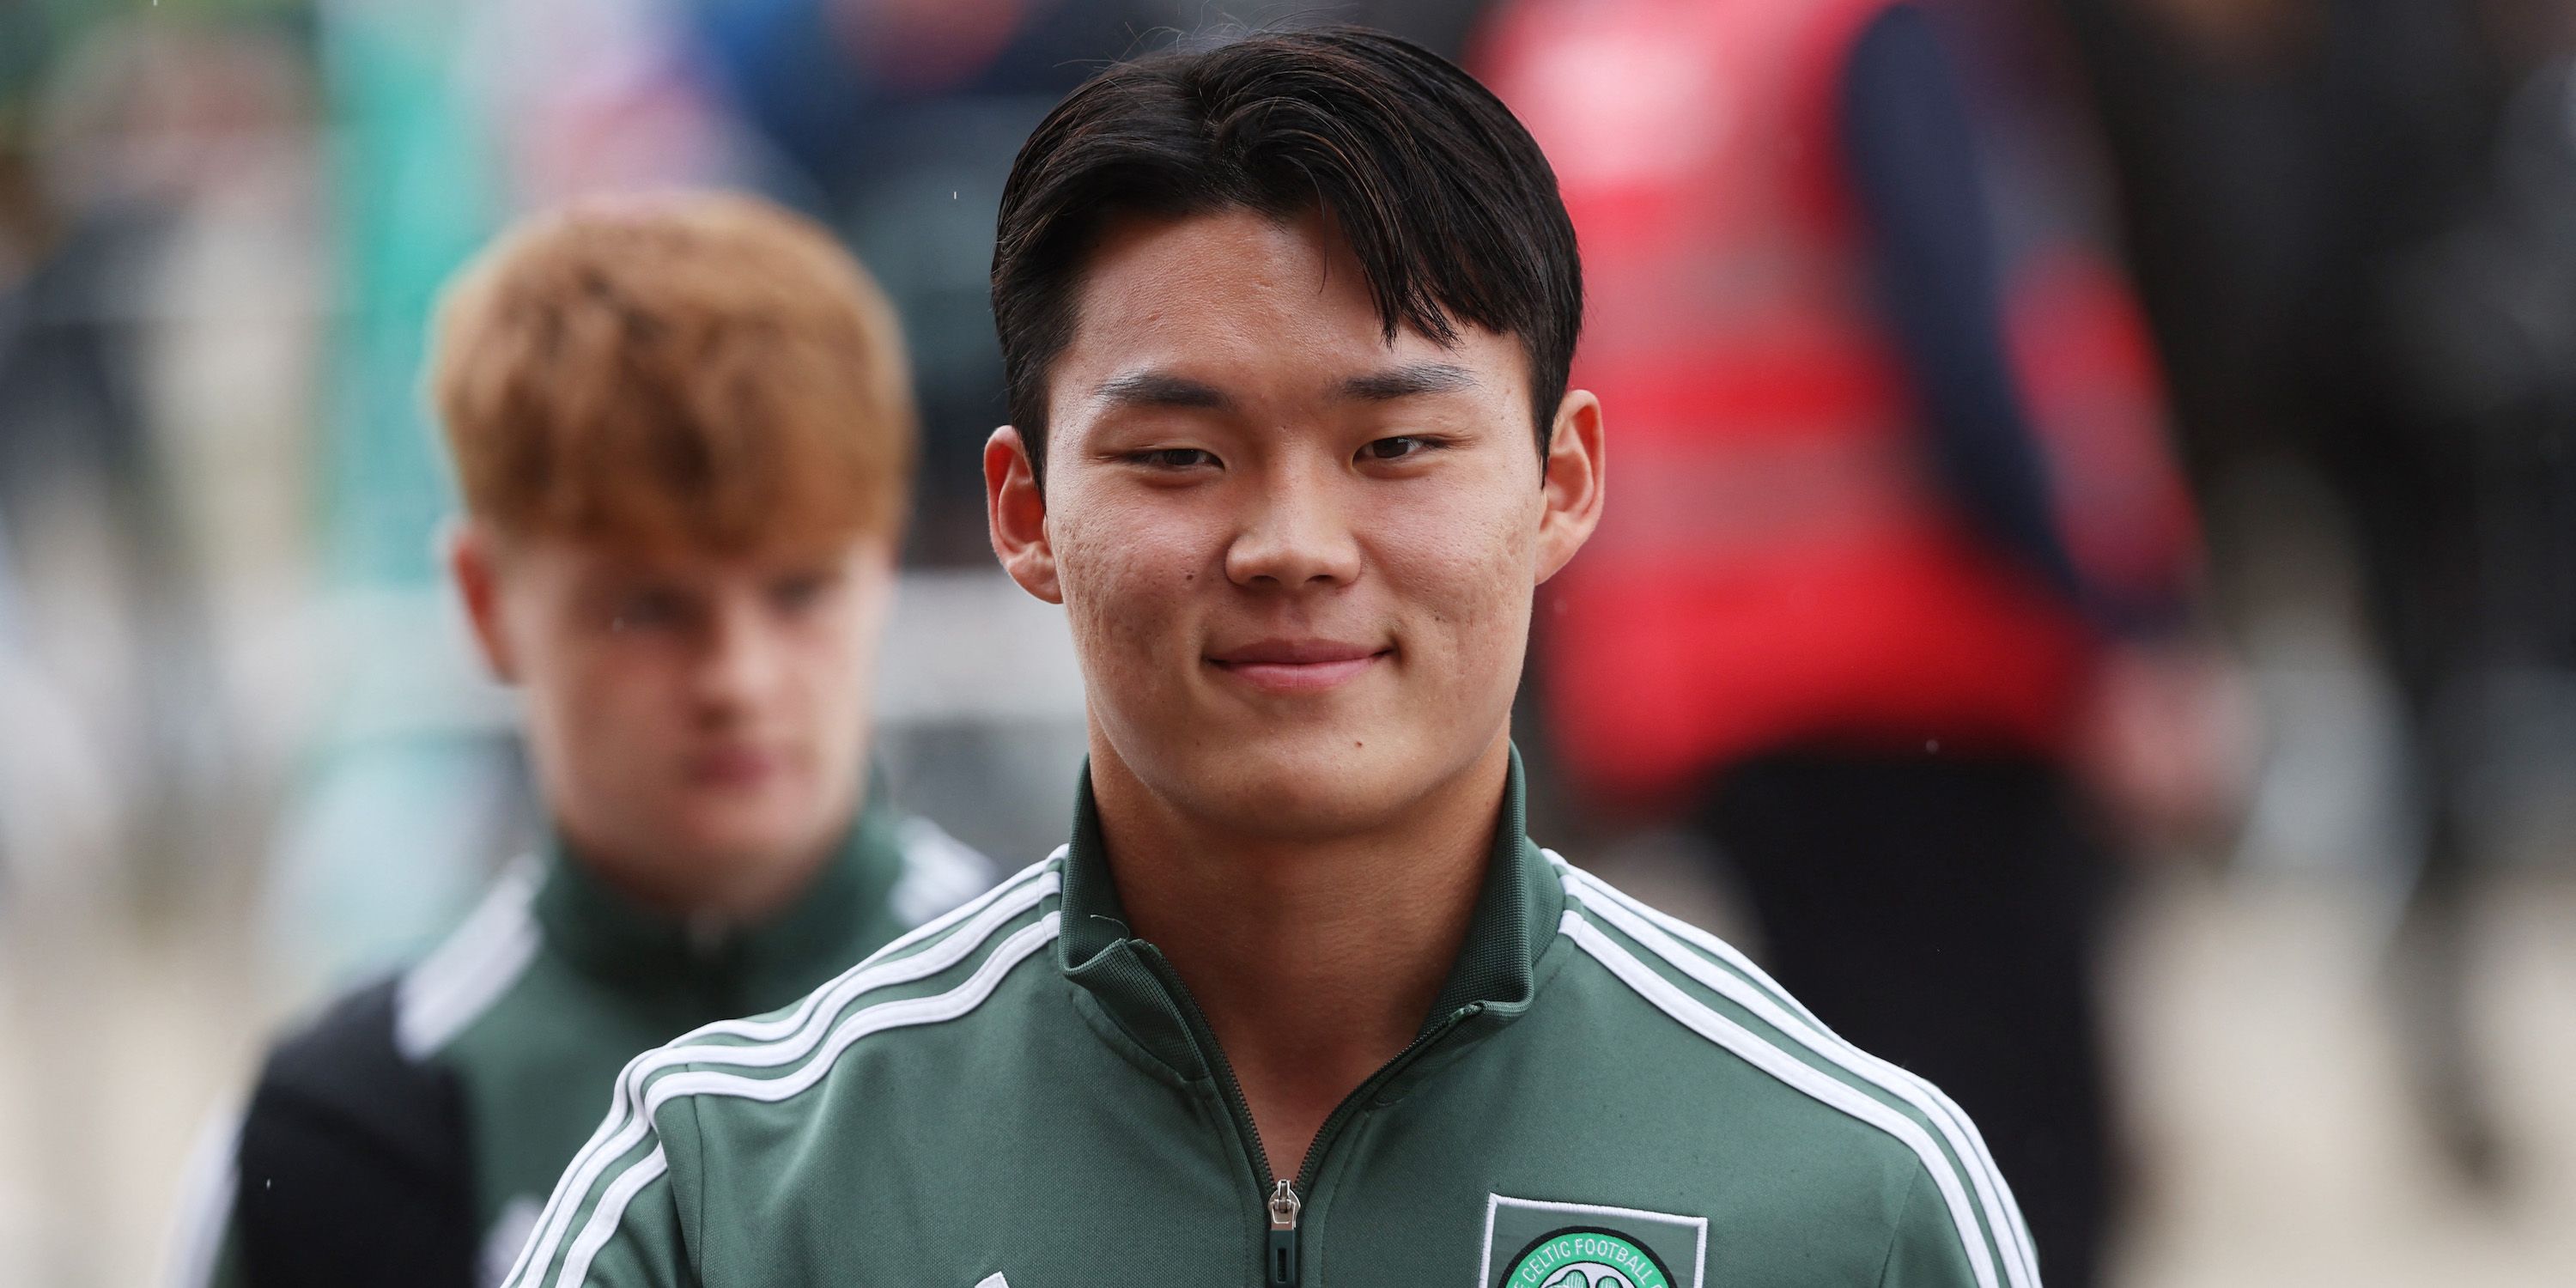 Celtic's Oh Hyeon-gyu arrives before the match